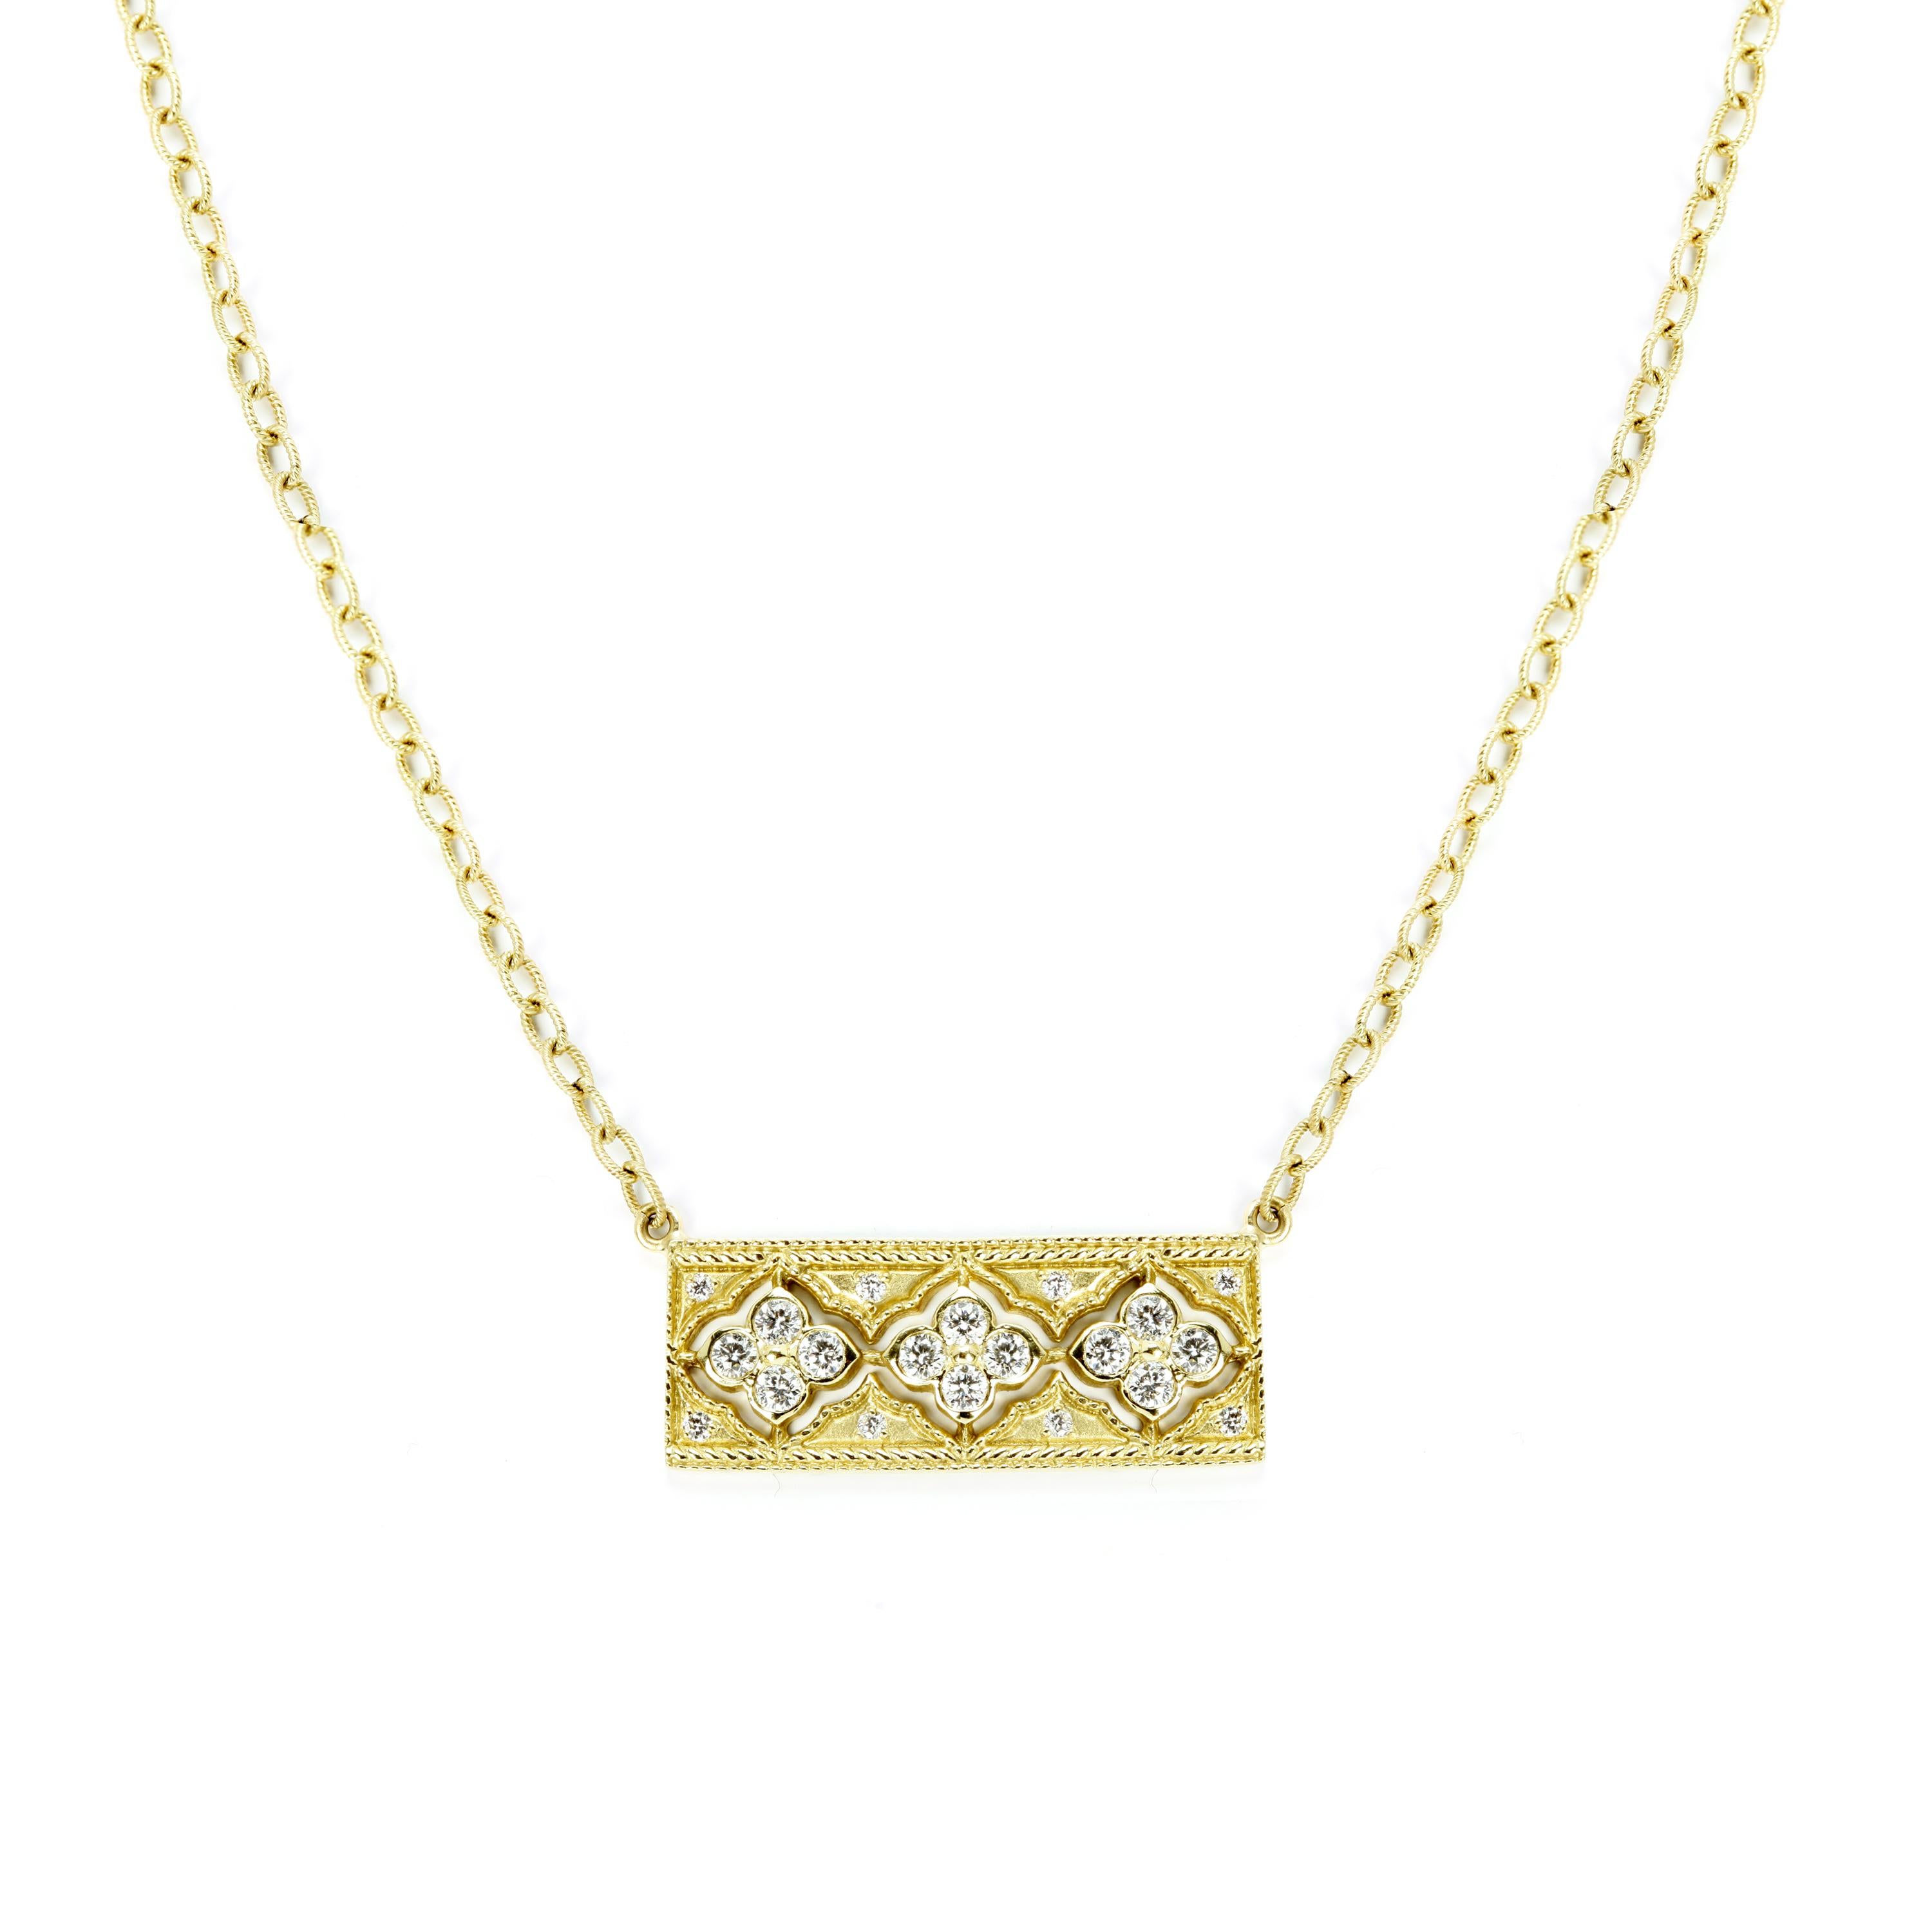 IF YOU ARE REALLY INTERESTED, CONTACT US WITH ANY REASONABLE OFFER. WE WILL TRY OUR BEST TO MAKE YOU HAPPY!

18K Yellow Gold and Diamond Bar Pendant Necklace by Stambolian

0.94 carat G color VS clarity diamonds are set across this bar pendant.